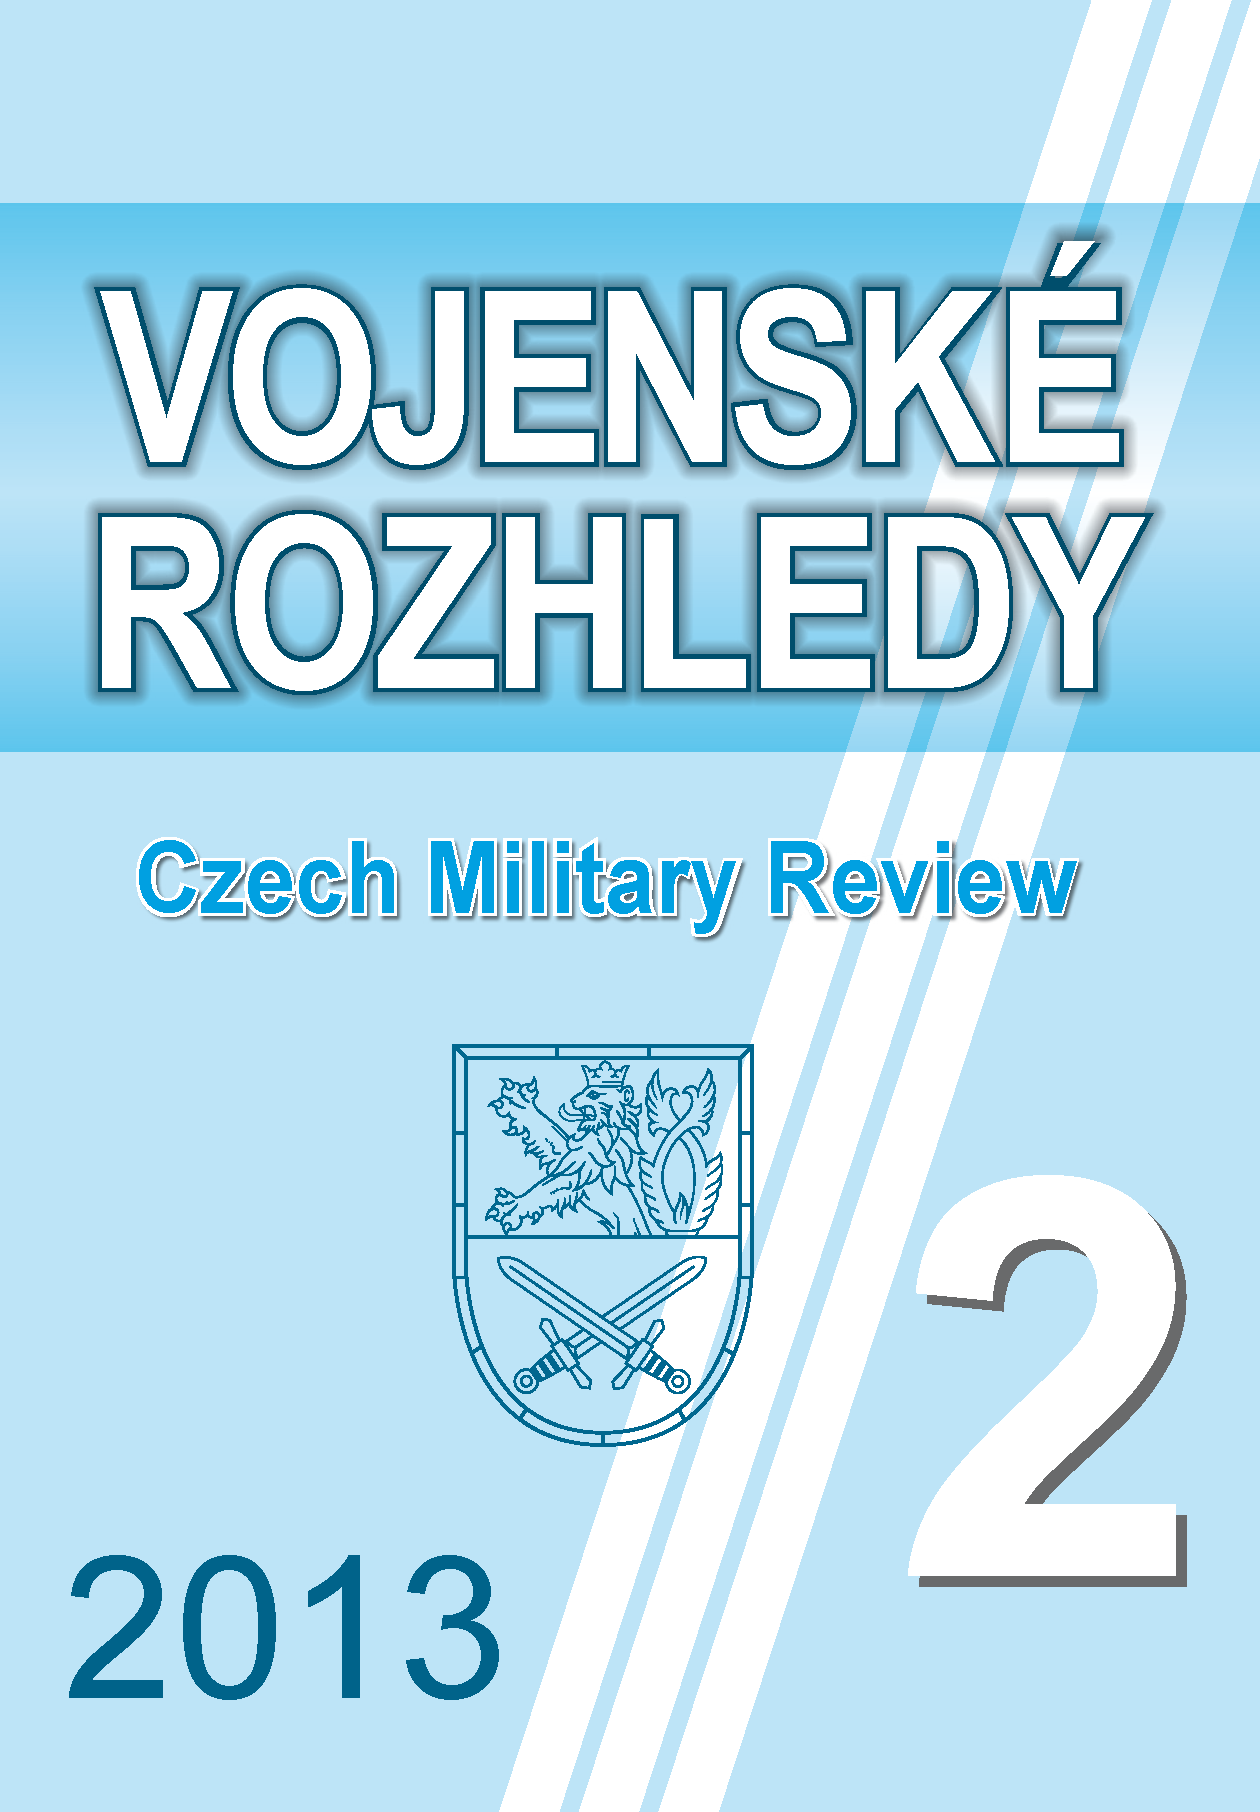 Using Muzzle Velocity Sensors under Conditions of Czech Artillery Cover Image